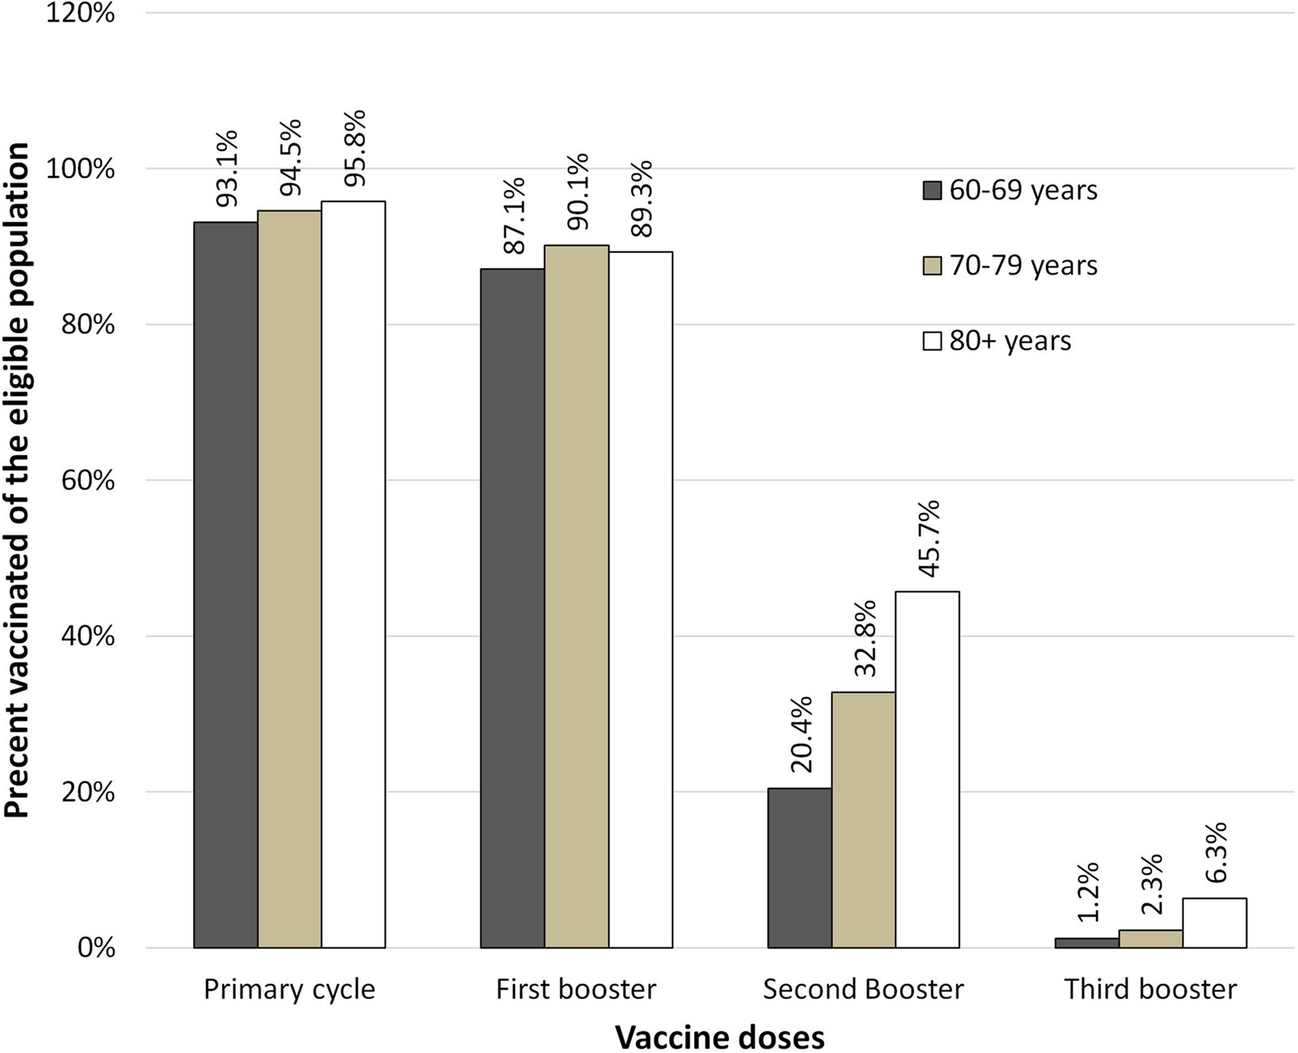 Evidence of concerning decline of COVID-19 vaccination in older persons